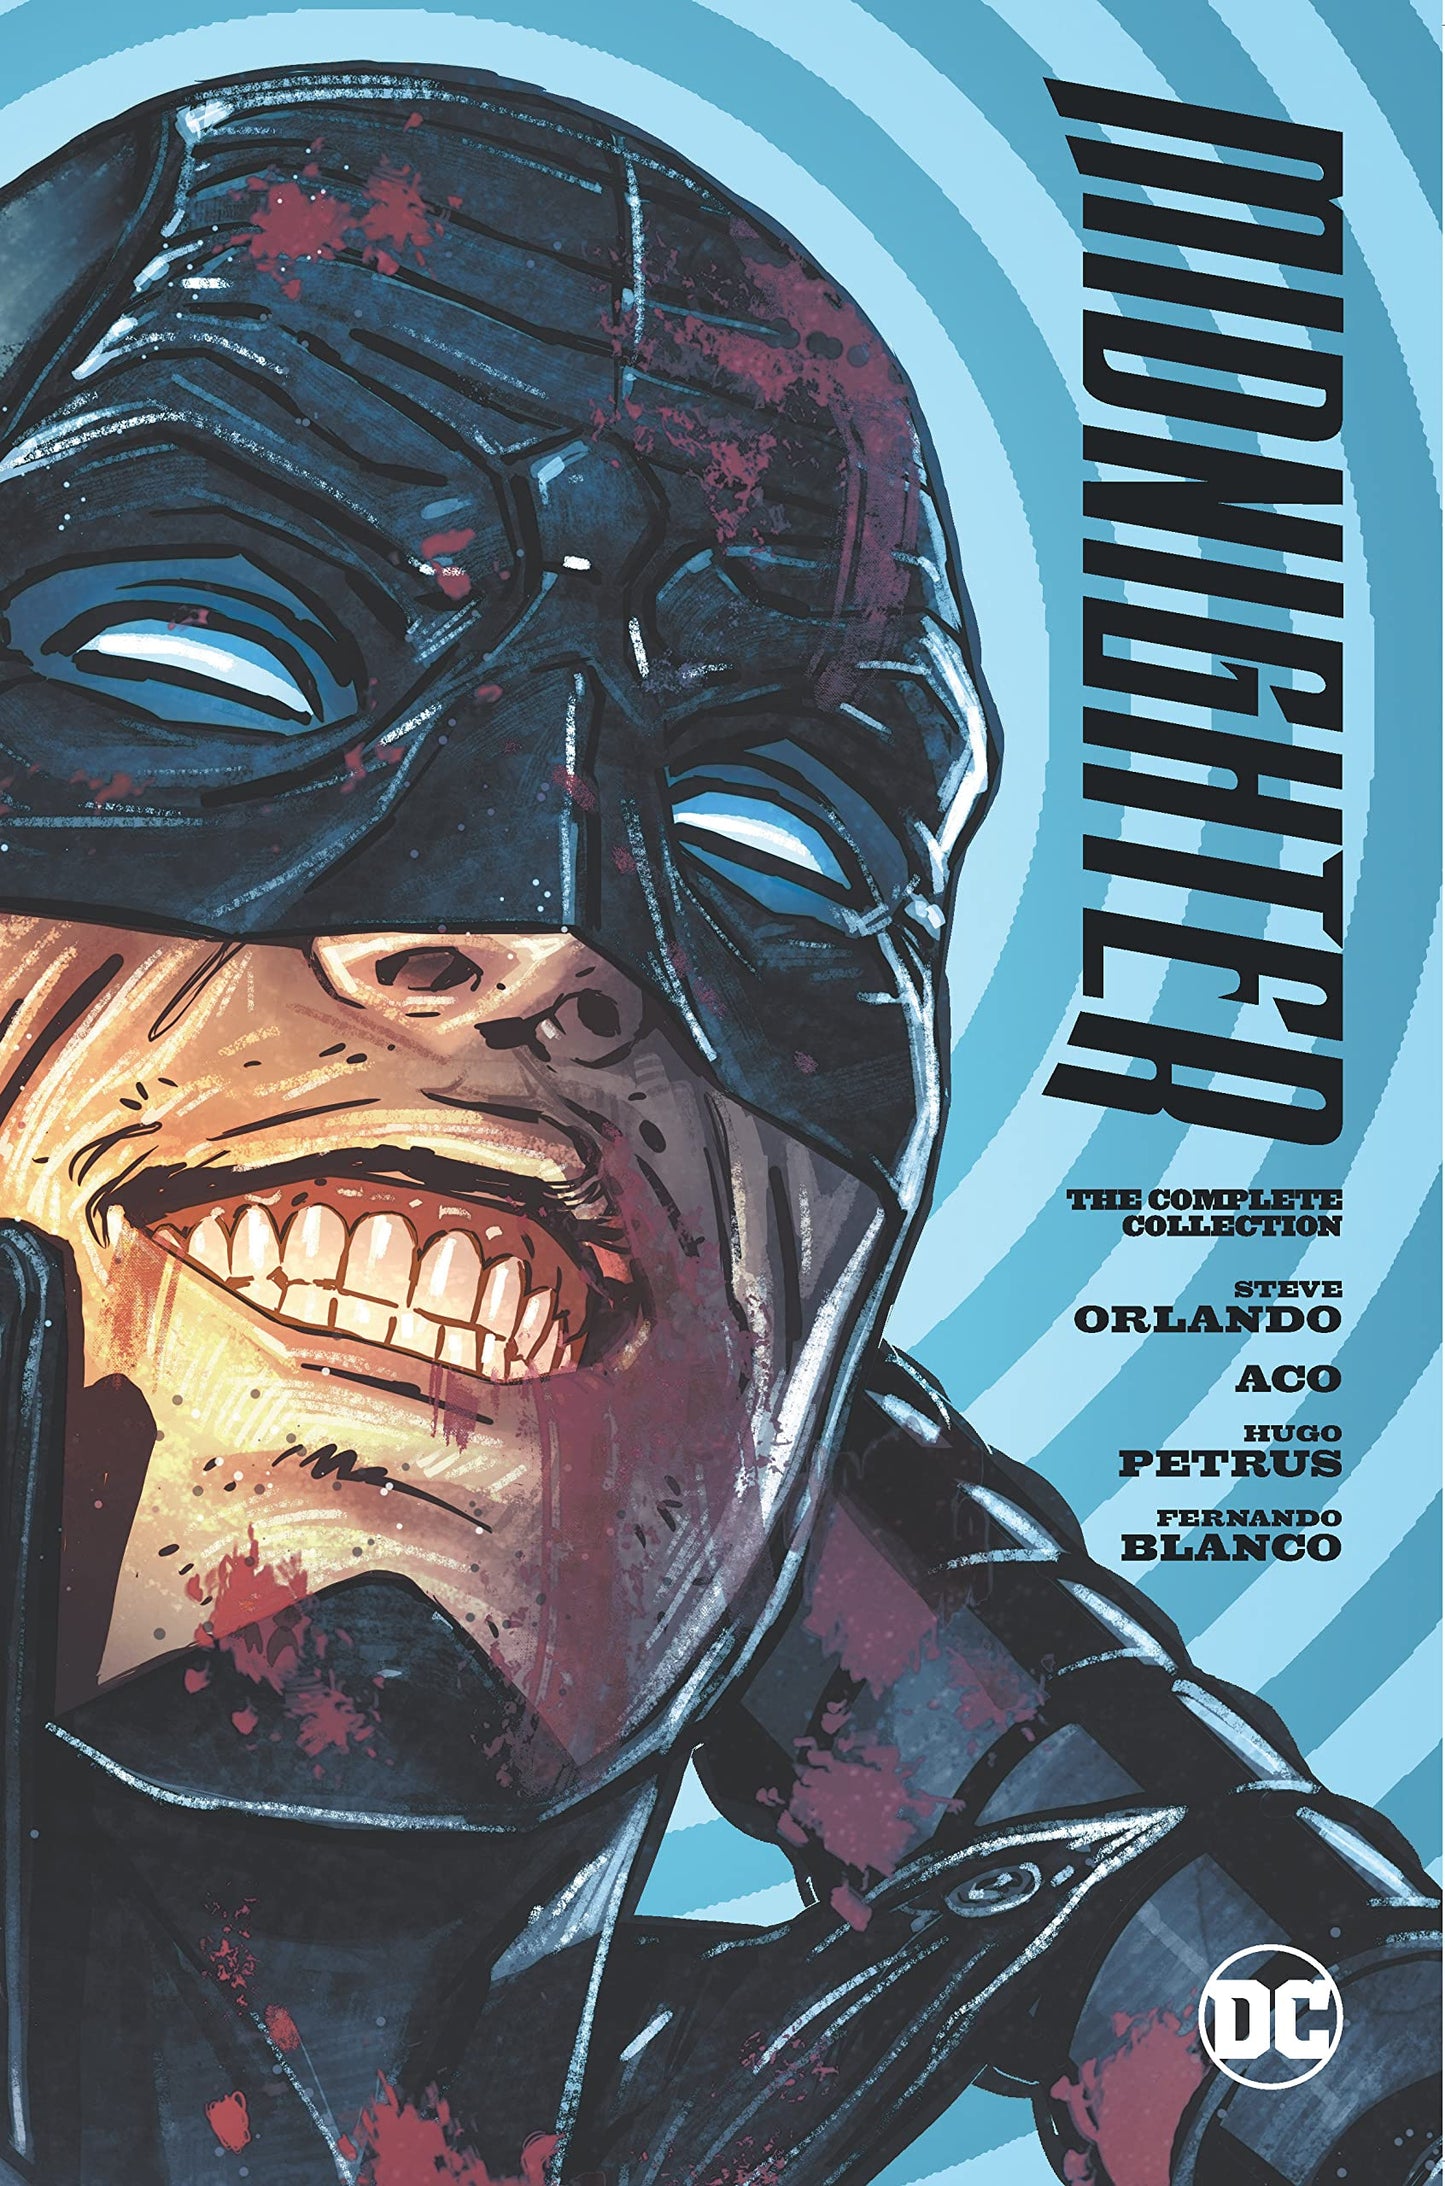 Midnighter Complete Collection